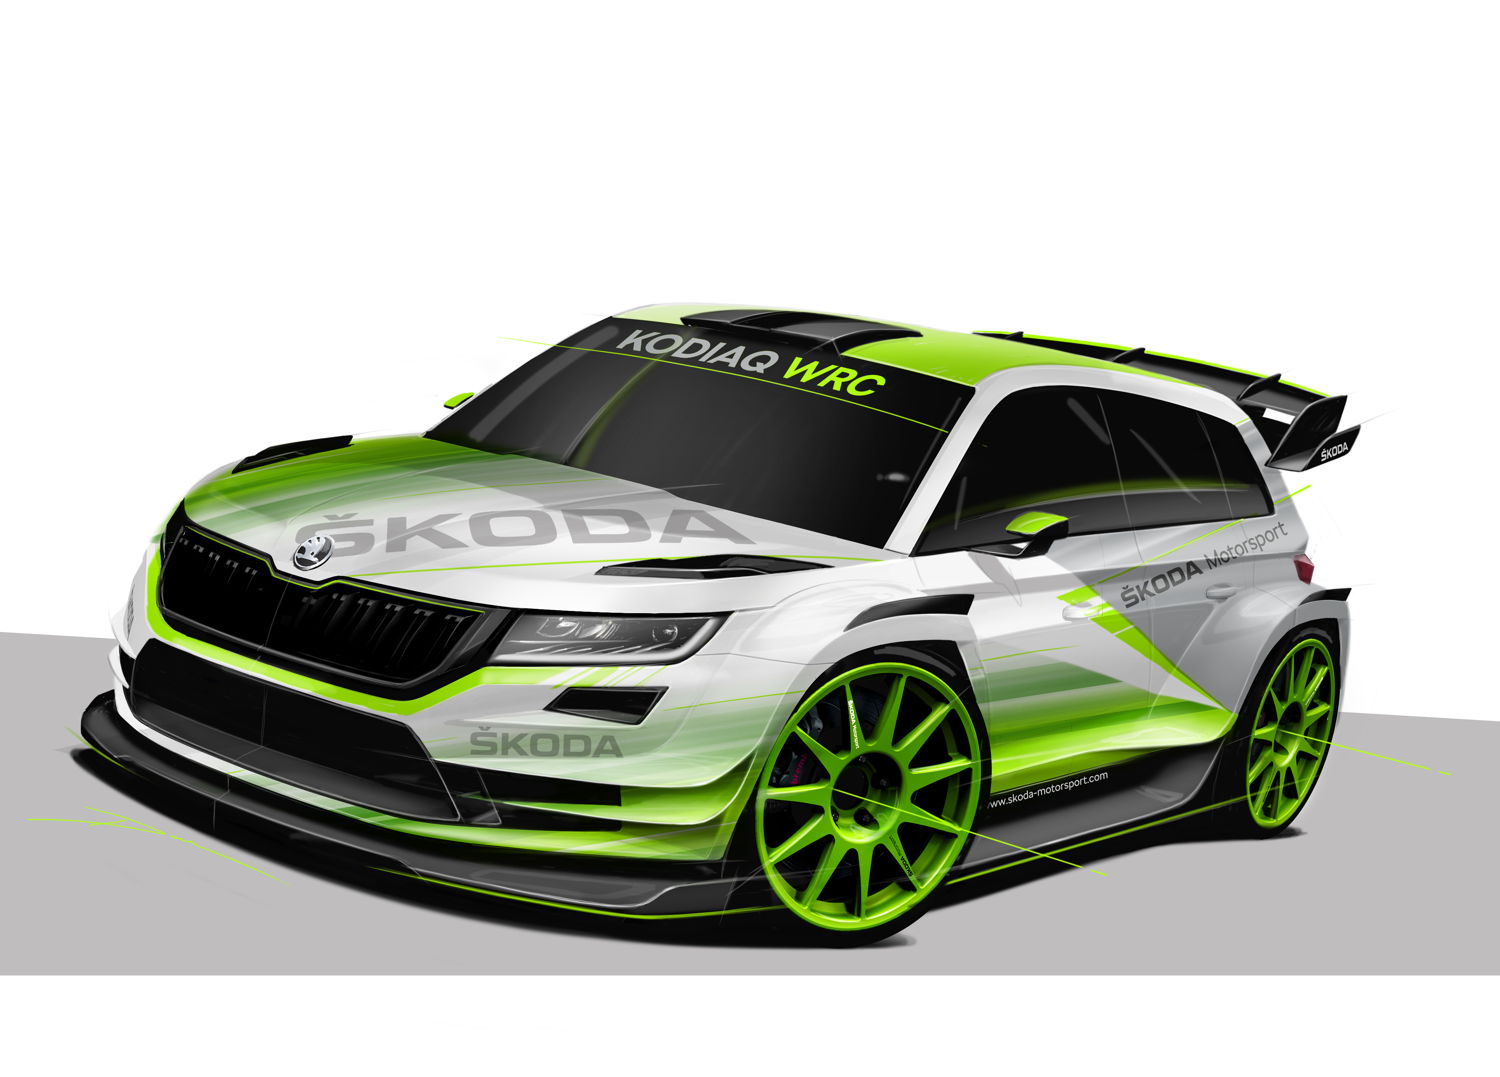 The ŠKODA KODIAQ WRC will debut on a racecourse in January 2018 at the Rally Monte Carlo. The names of the drivers and co-drivers who will crew the two ŠKODA KODIAQ WRC rally cars will be announced by ŠKODA Motorsport in September.